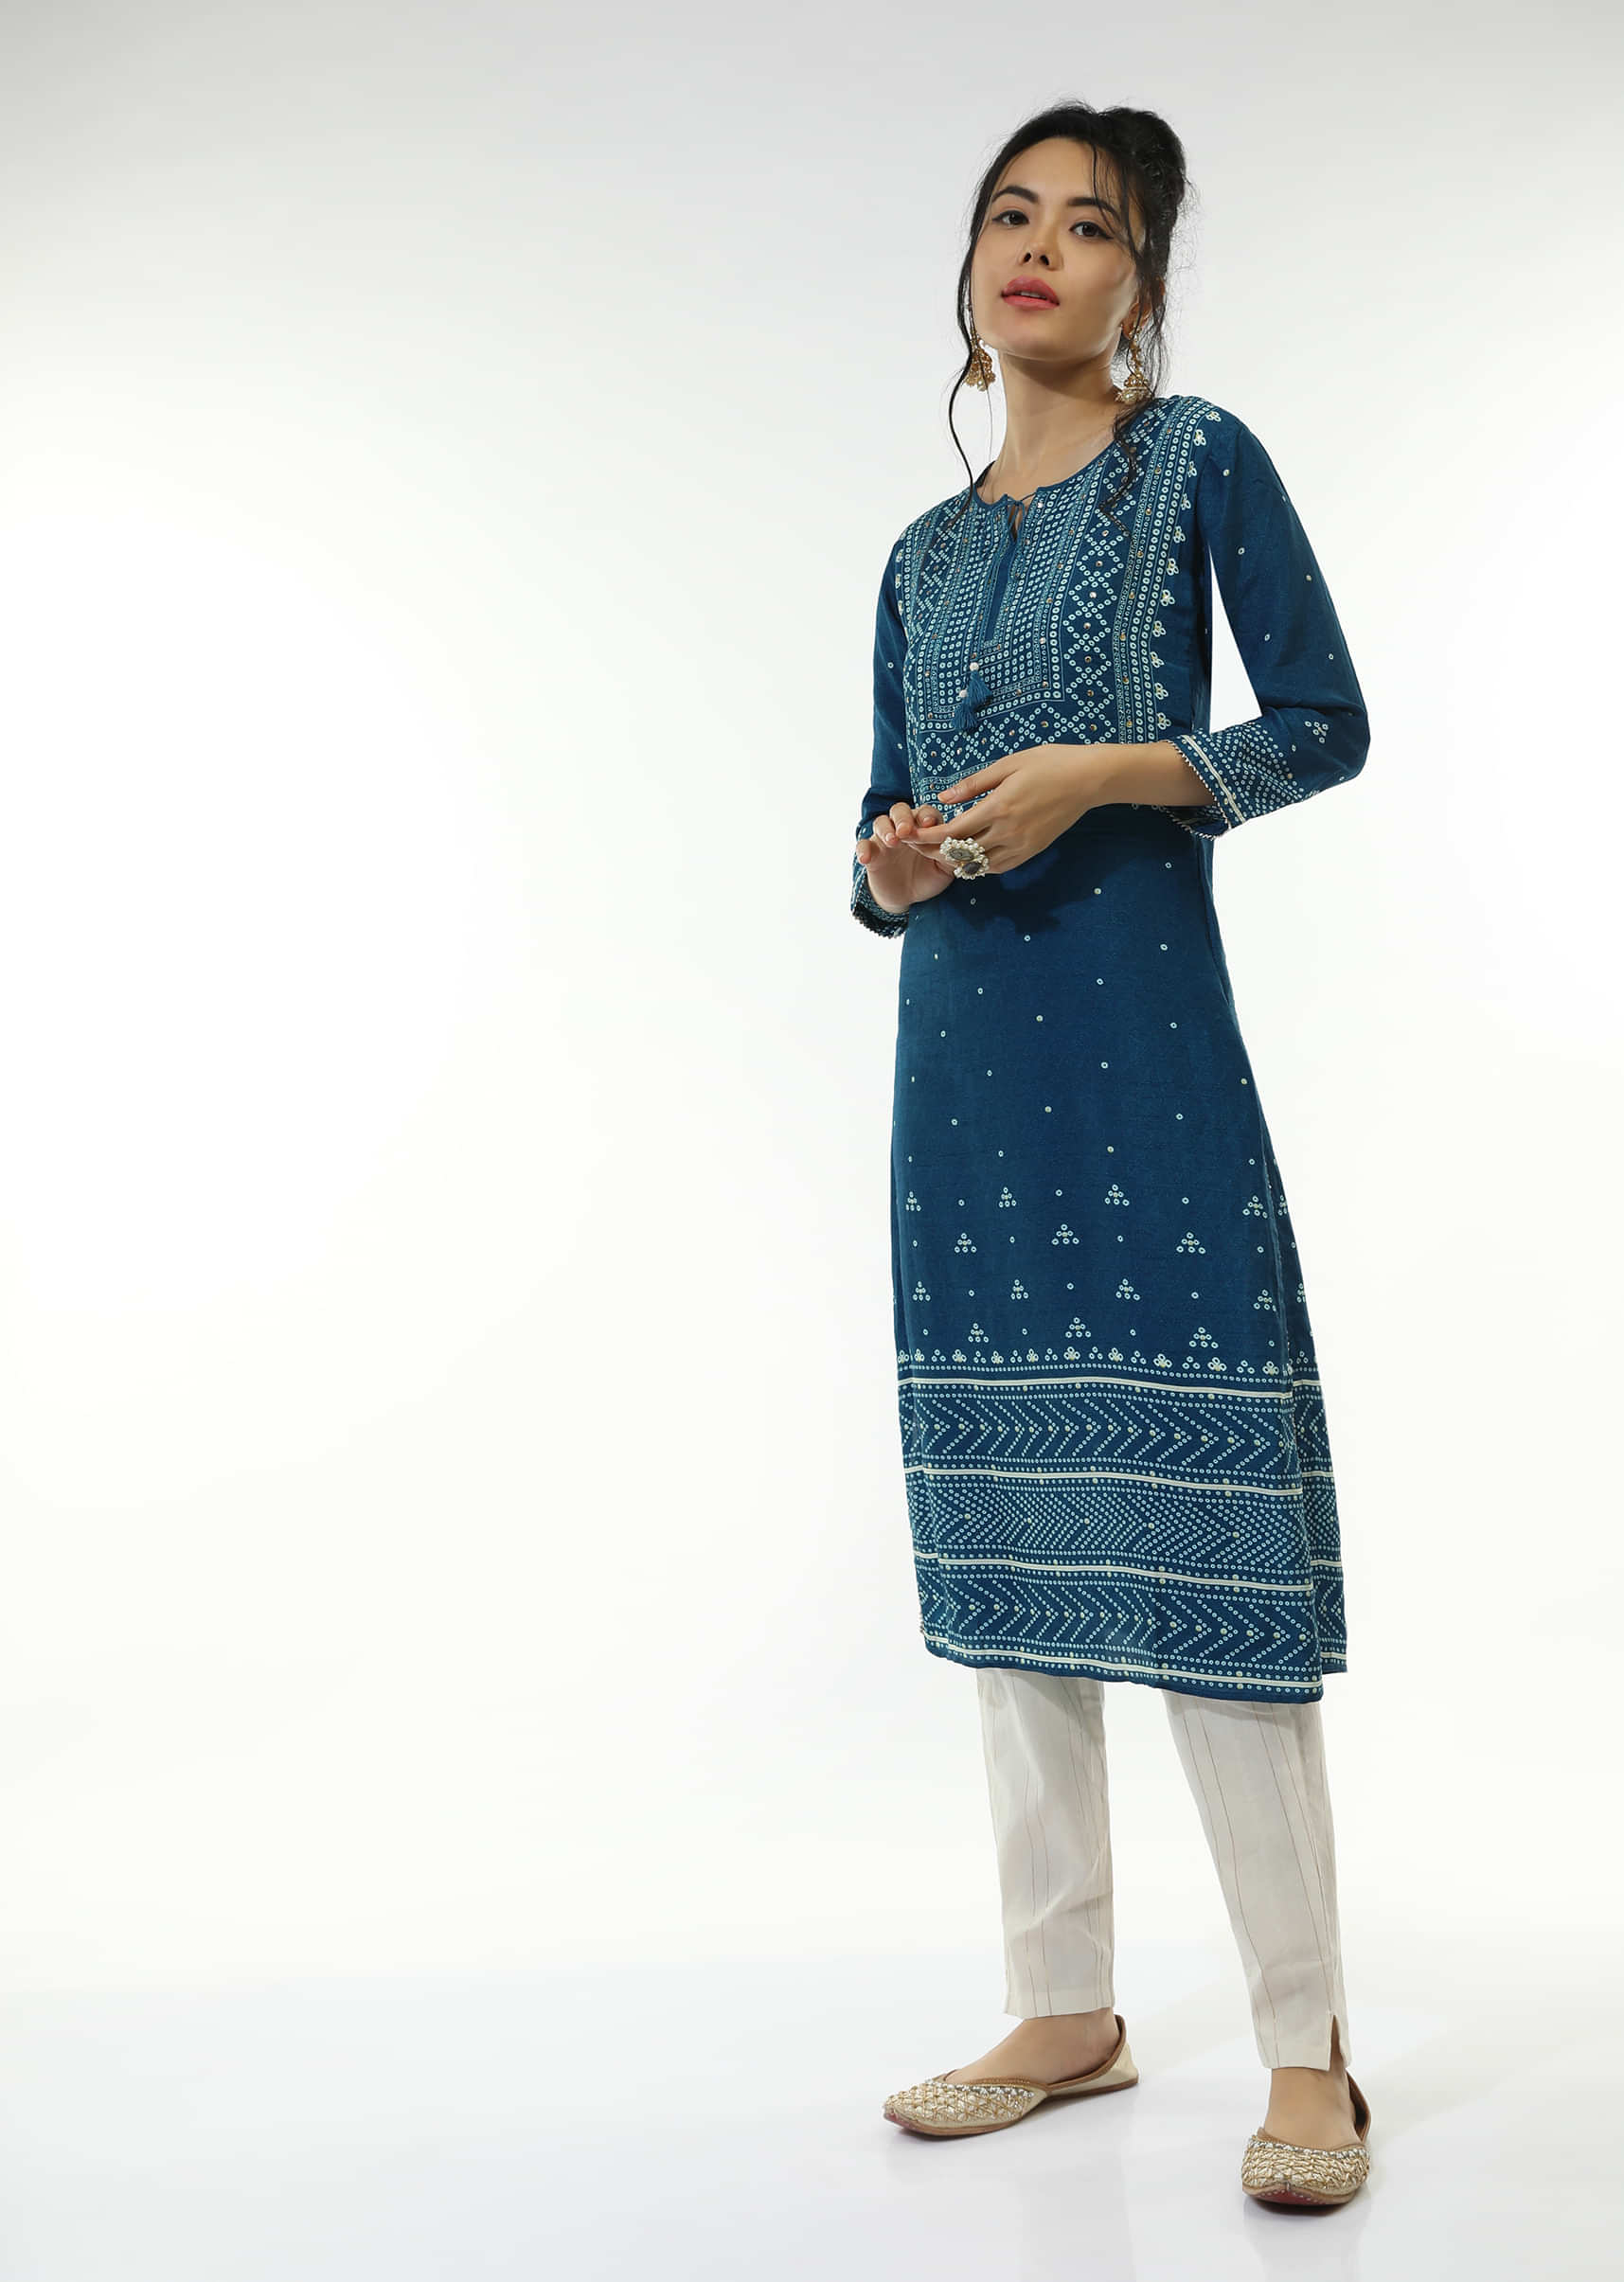 Buy Mint Embroidered Top Online - Aarke International Store View